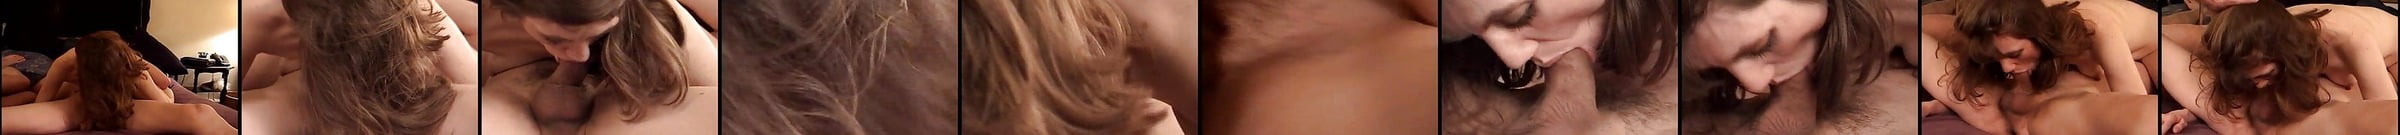 Featured Facial While Sucking Another Cock Compilation Porn Videos 0478